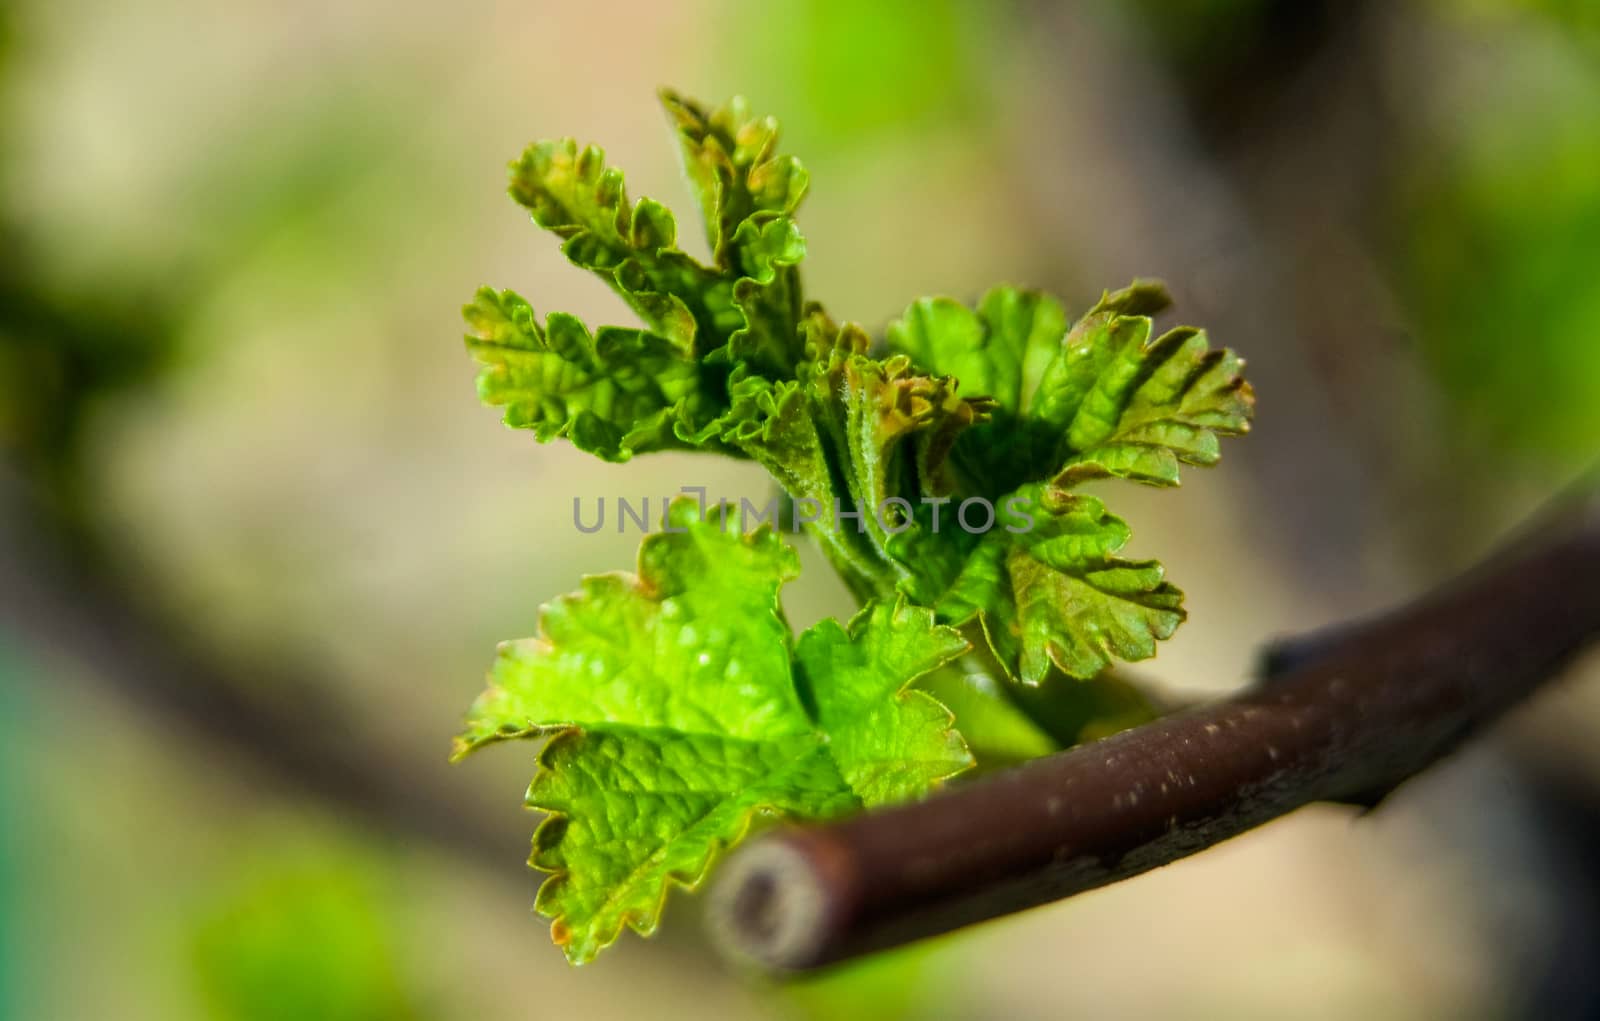 New leafs of currant starting growing in spring